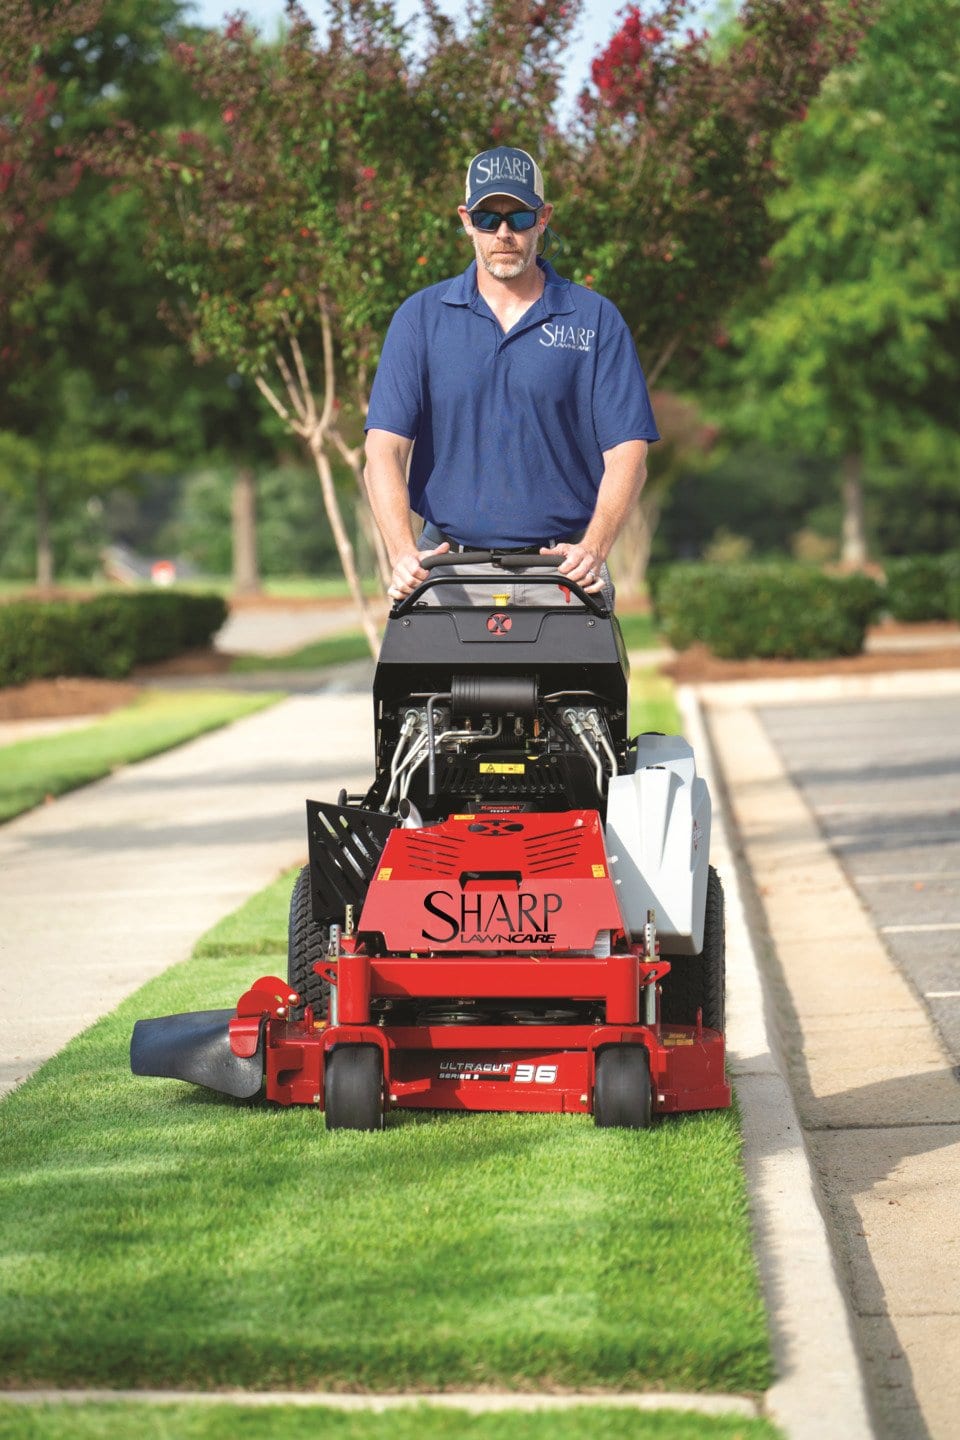 Sharp Lawn Care employee mowing a lawn in Sioux Falls, SD.